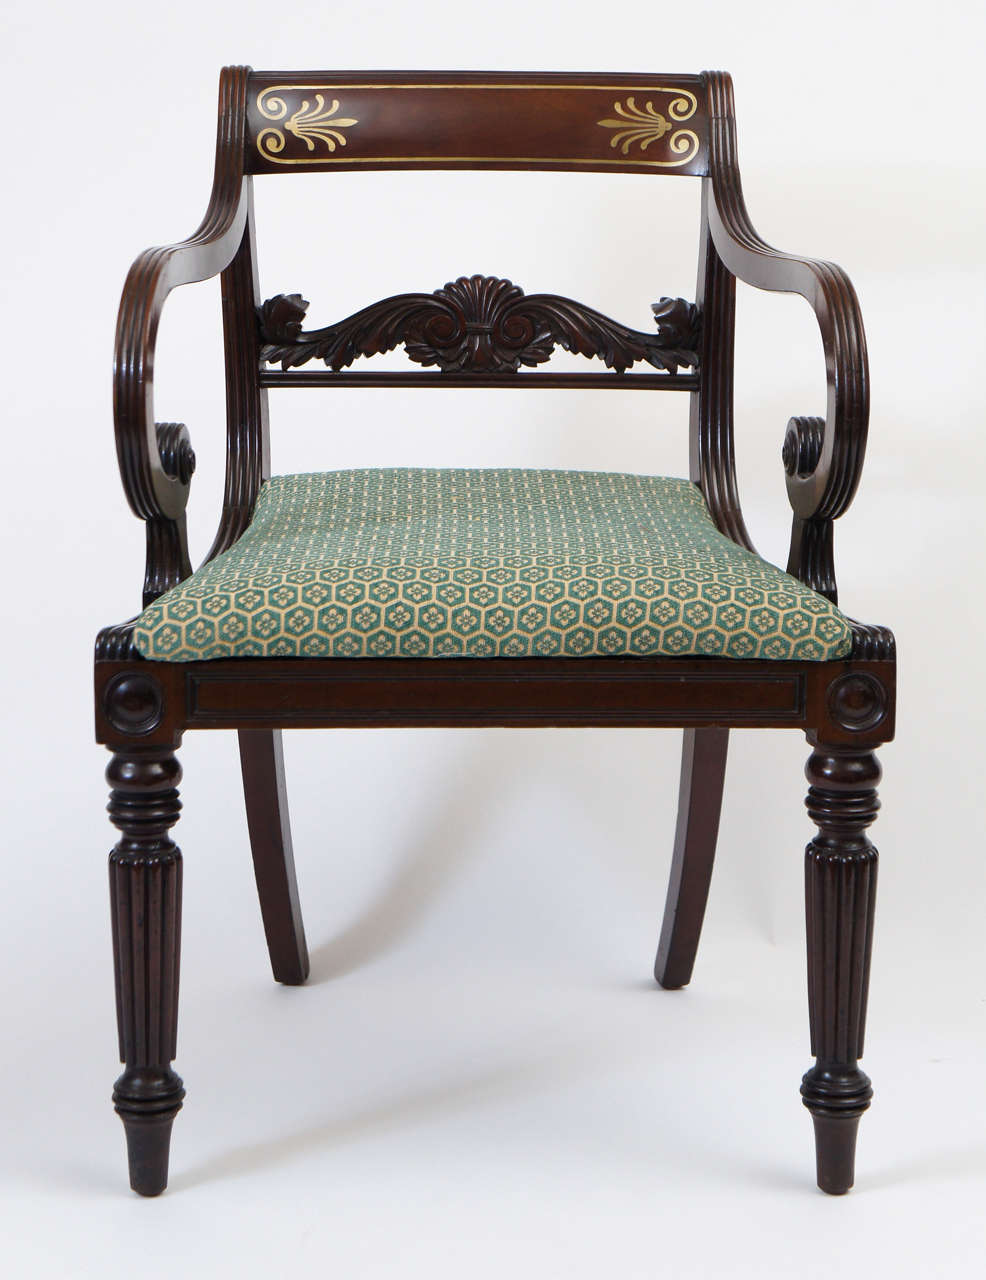 Fine quality circa 1815 late George III English Regency period neoclassical style mahogany armchair having anthemion motif brass inlaid backrest above intricately carved acanthus design horizontal splat, dramatic scrolling arms surmounting roundel